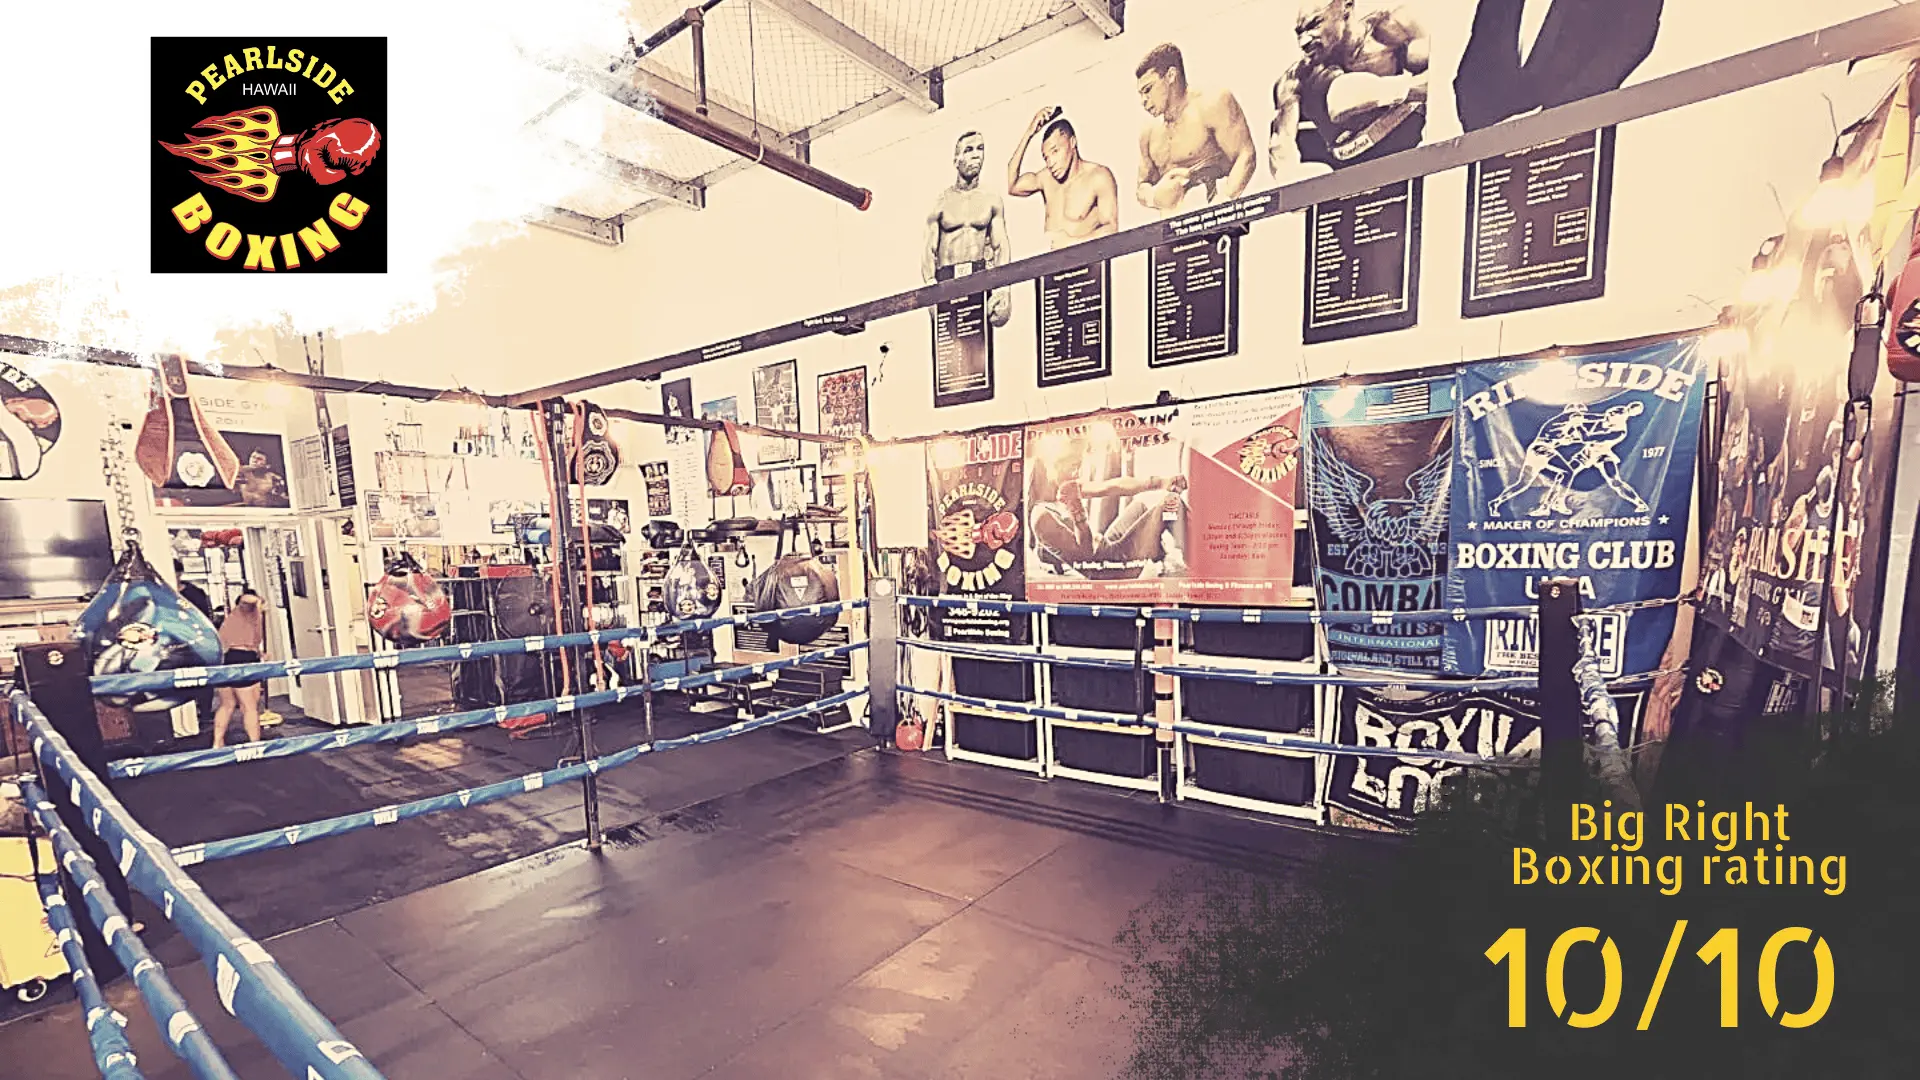 PearlSide Boxing Gym